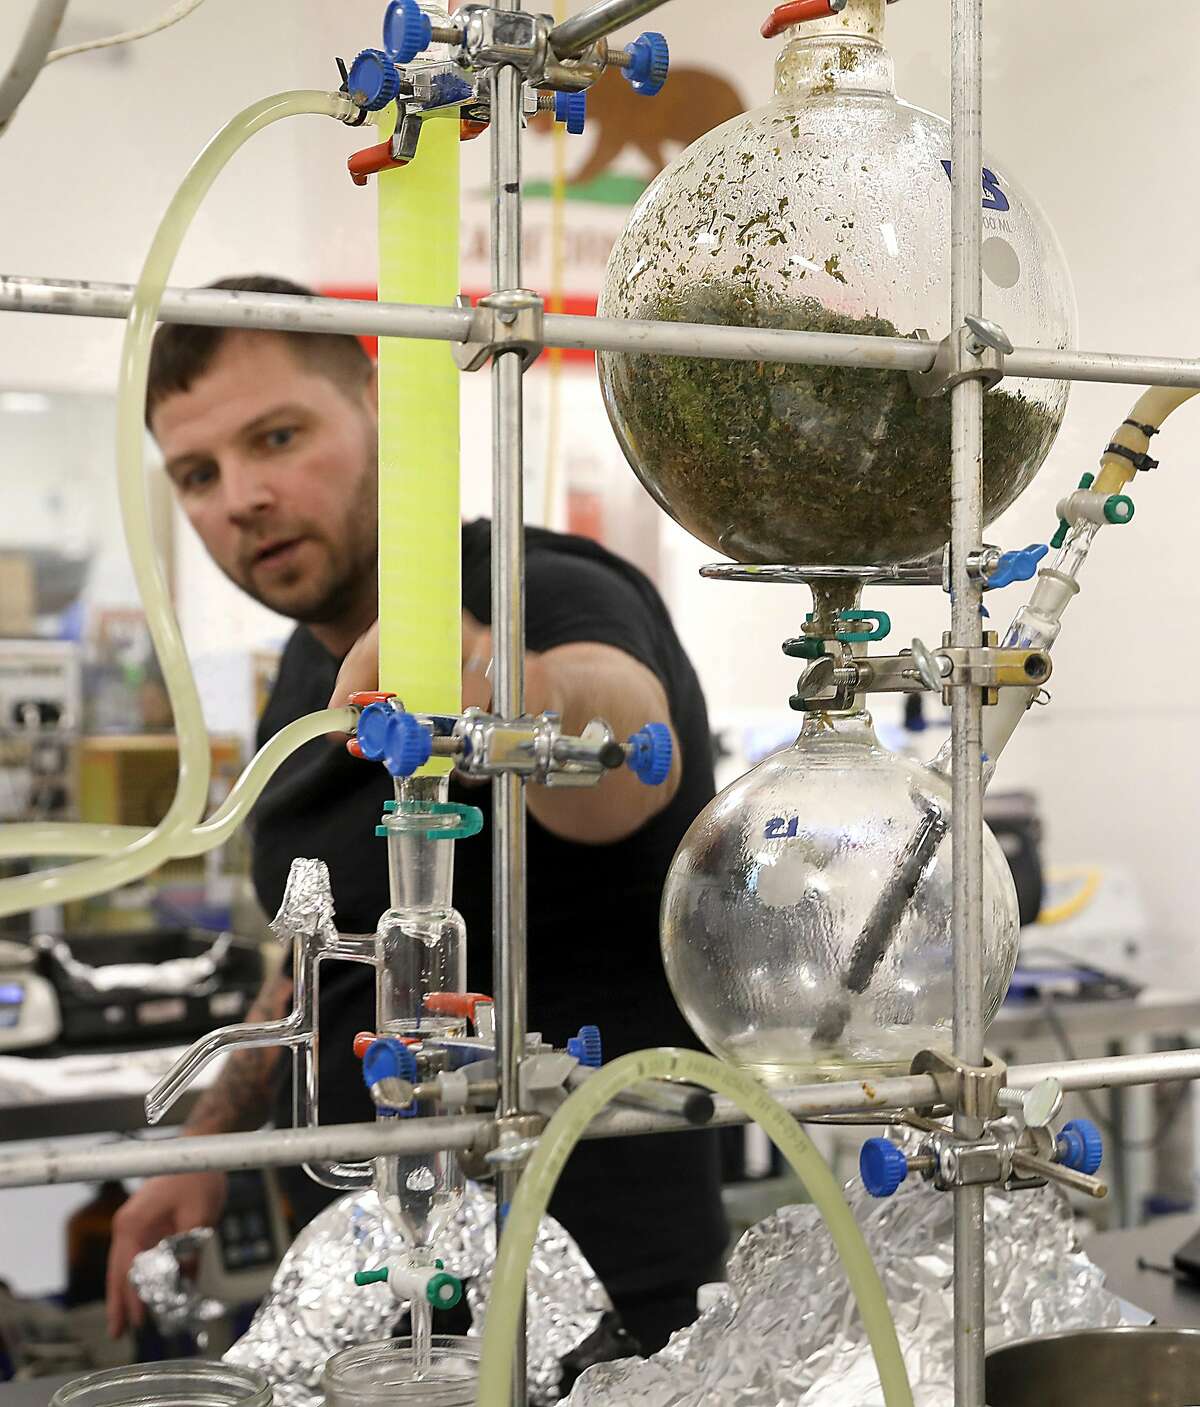 CEO Chris Emerson of Level Blend shows the steam distillation machine (at right) used to make cannabis oil on Tuesday, Feb. 19, 2019, in San Francisco, Calif.